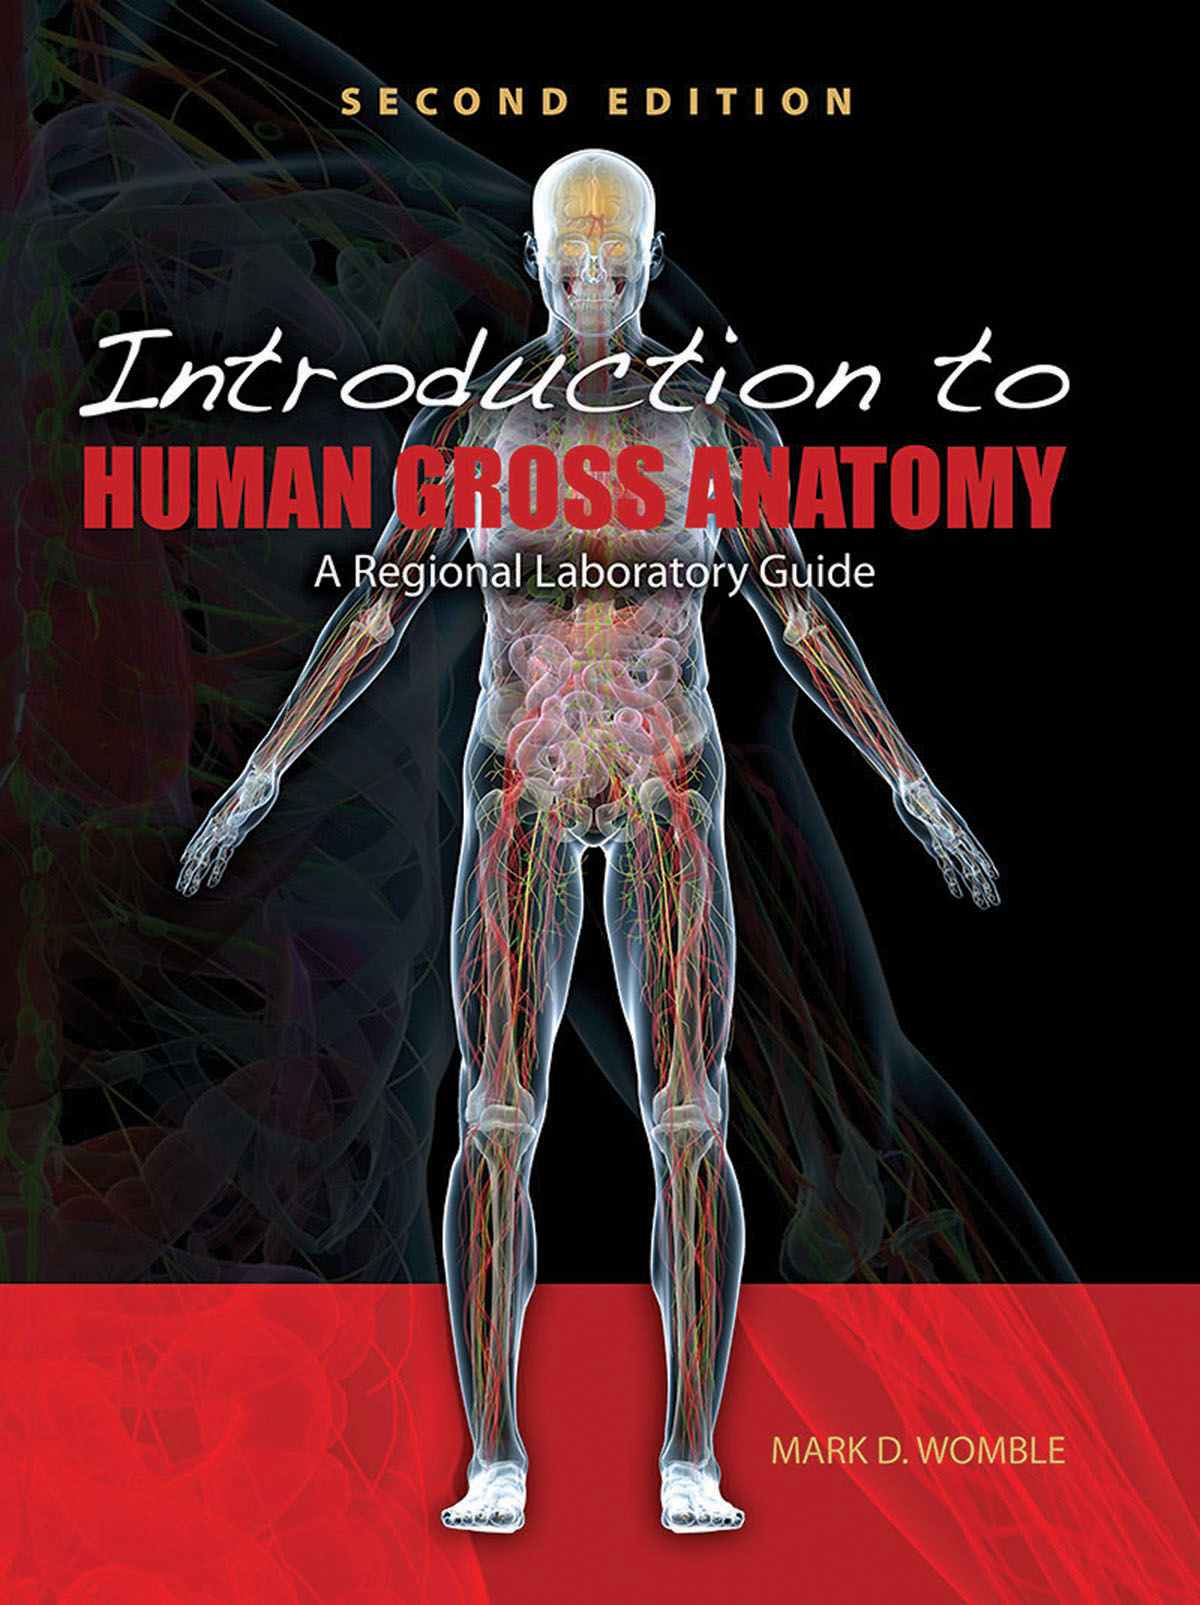 Introduction to Human Gross Anatomy, Second Edition, by Mark D. Womble, professor of Biological Sciences and Graduate Program director.